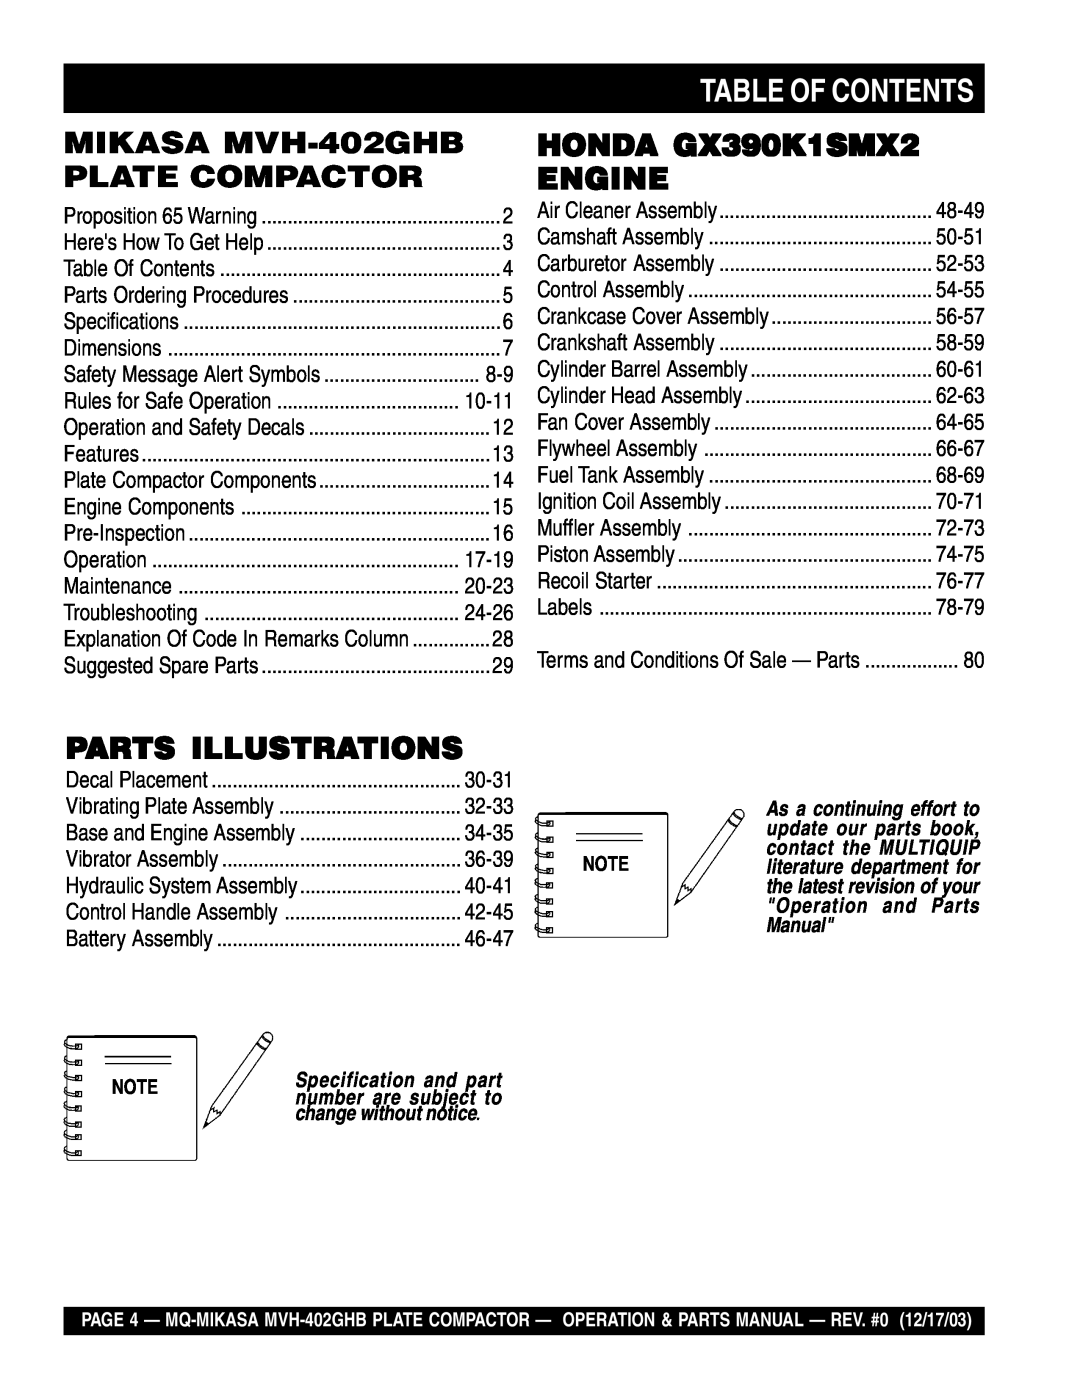 Multiquip manual Table Of Contents, MIKASA MVH-402GHB PLATE COMPACTOR, HONDA GX390K1SMX2 ENGINE, Parts Illustrations 